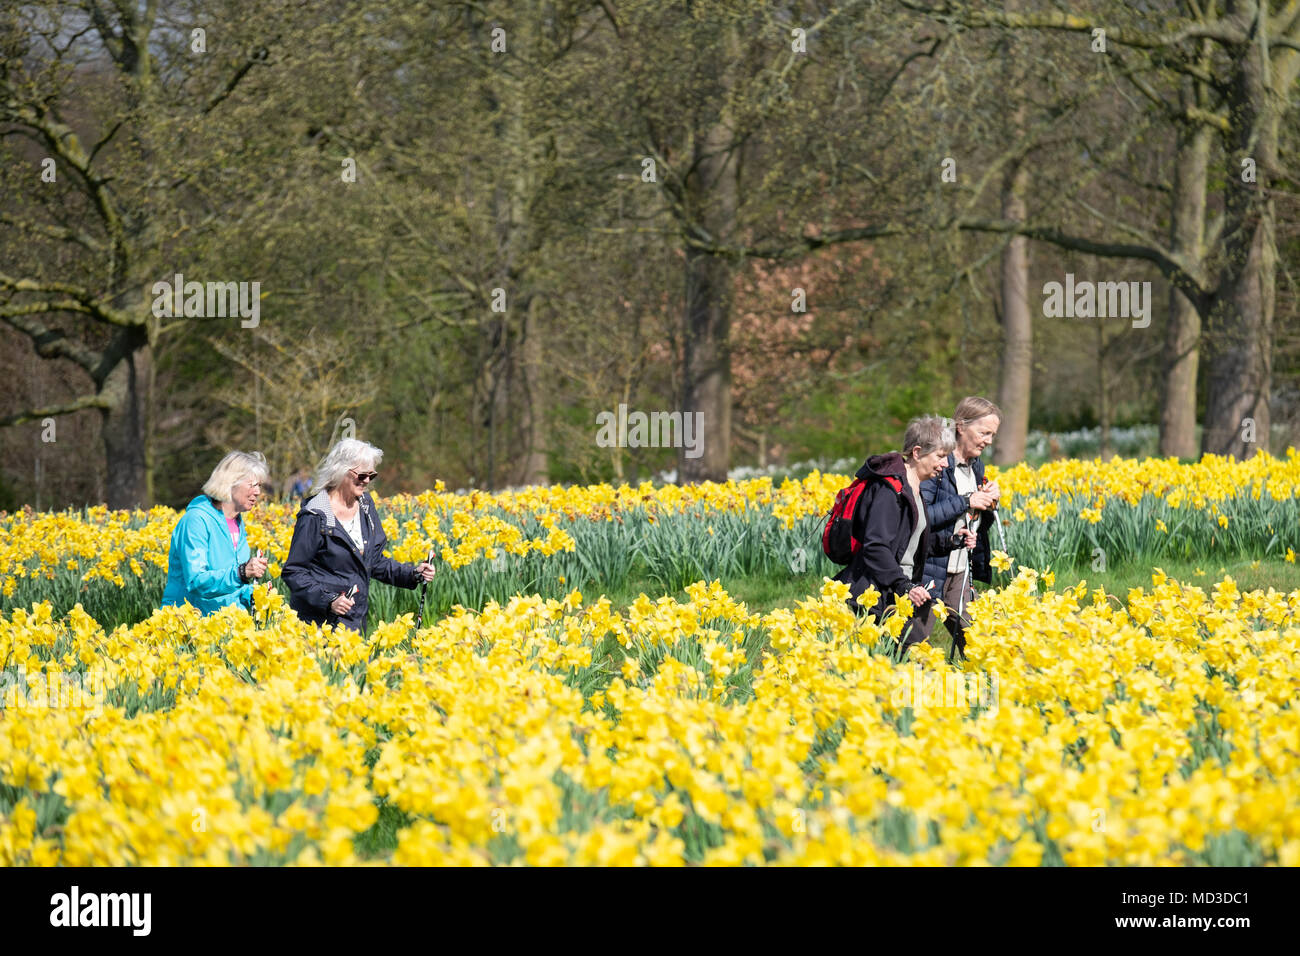 Sefton Park, Liverpool. 18th Apr, 2018. UK Weather: People enjoying the warm weather as the sun comes out early this morning at Sefton Park in Liverpool on Wednesday, April 18, 2018. Warm weather is expected to bring temperatures across the UK rising to above 20 degrees celsius today. © Christopher Middleton/Alamy Live News Stock Photo